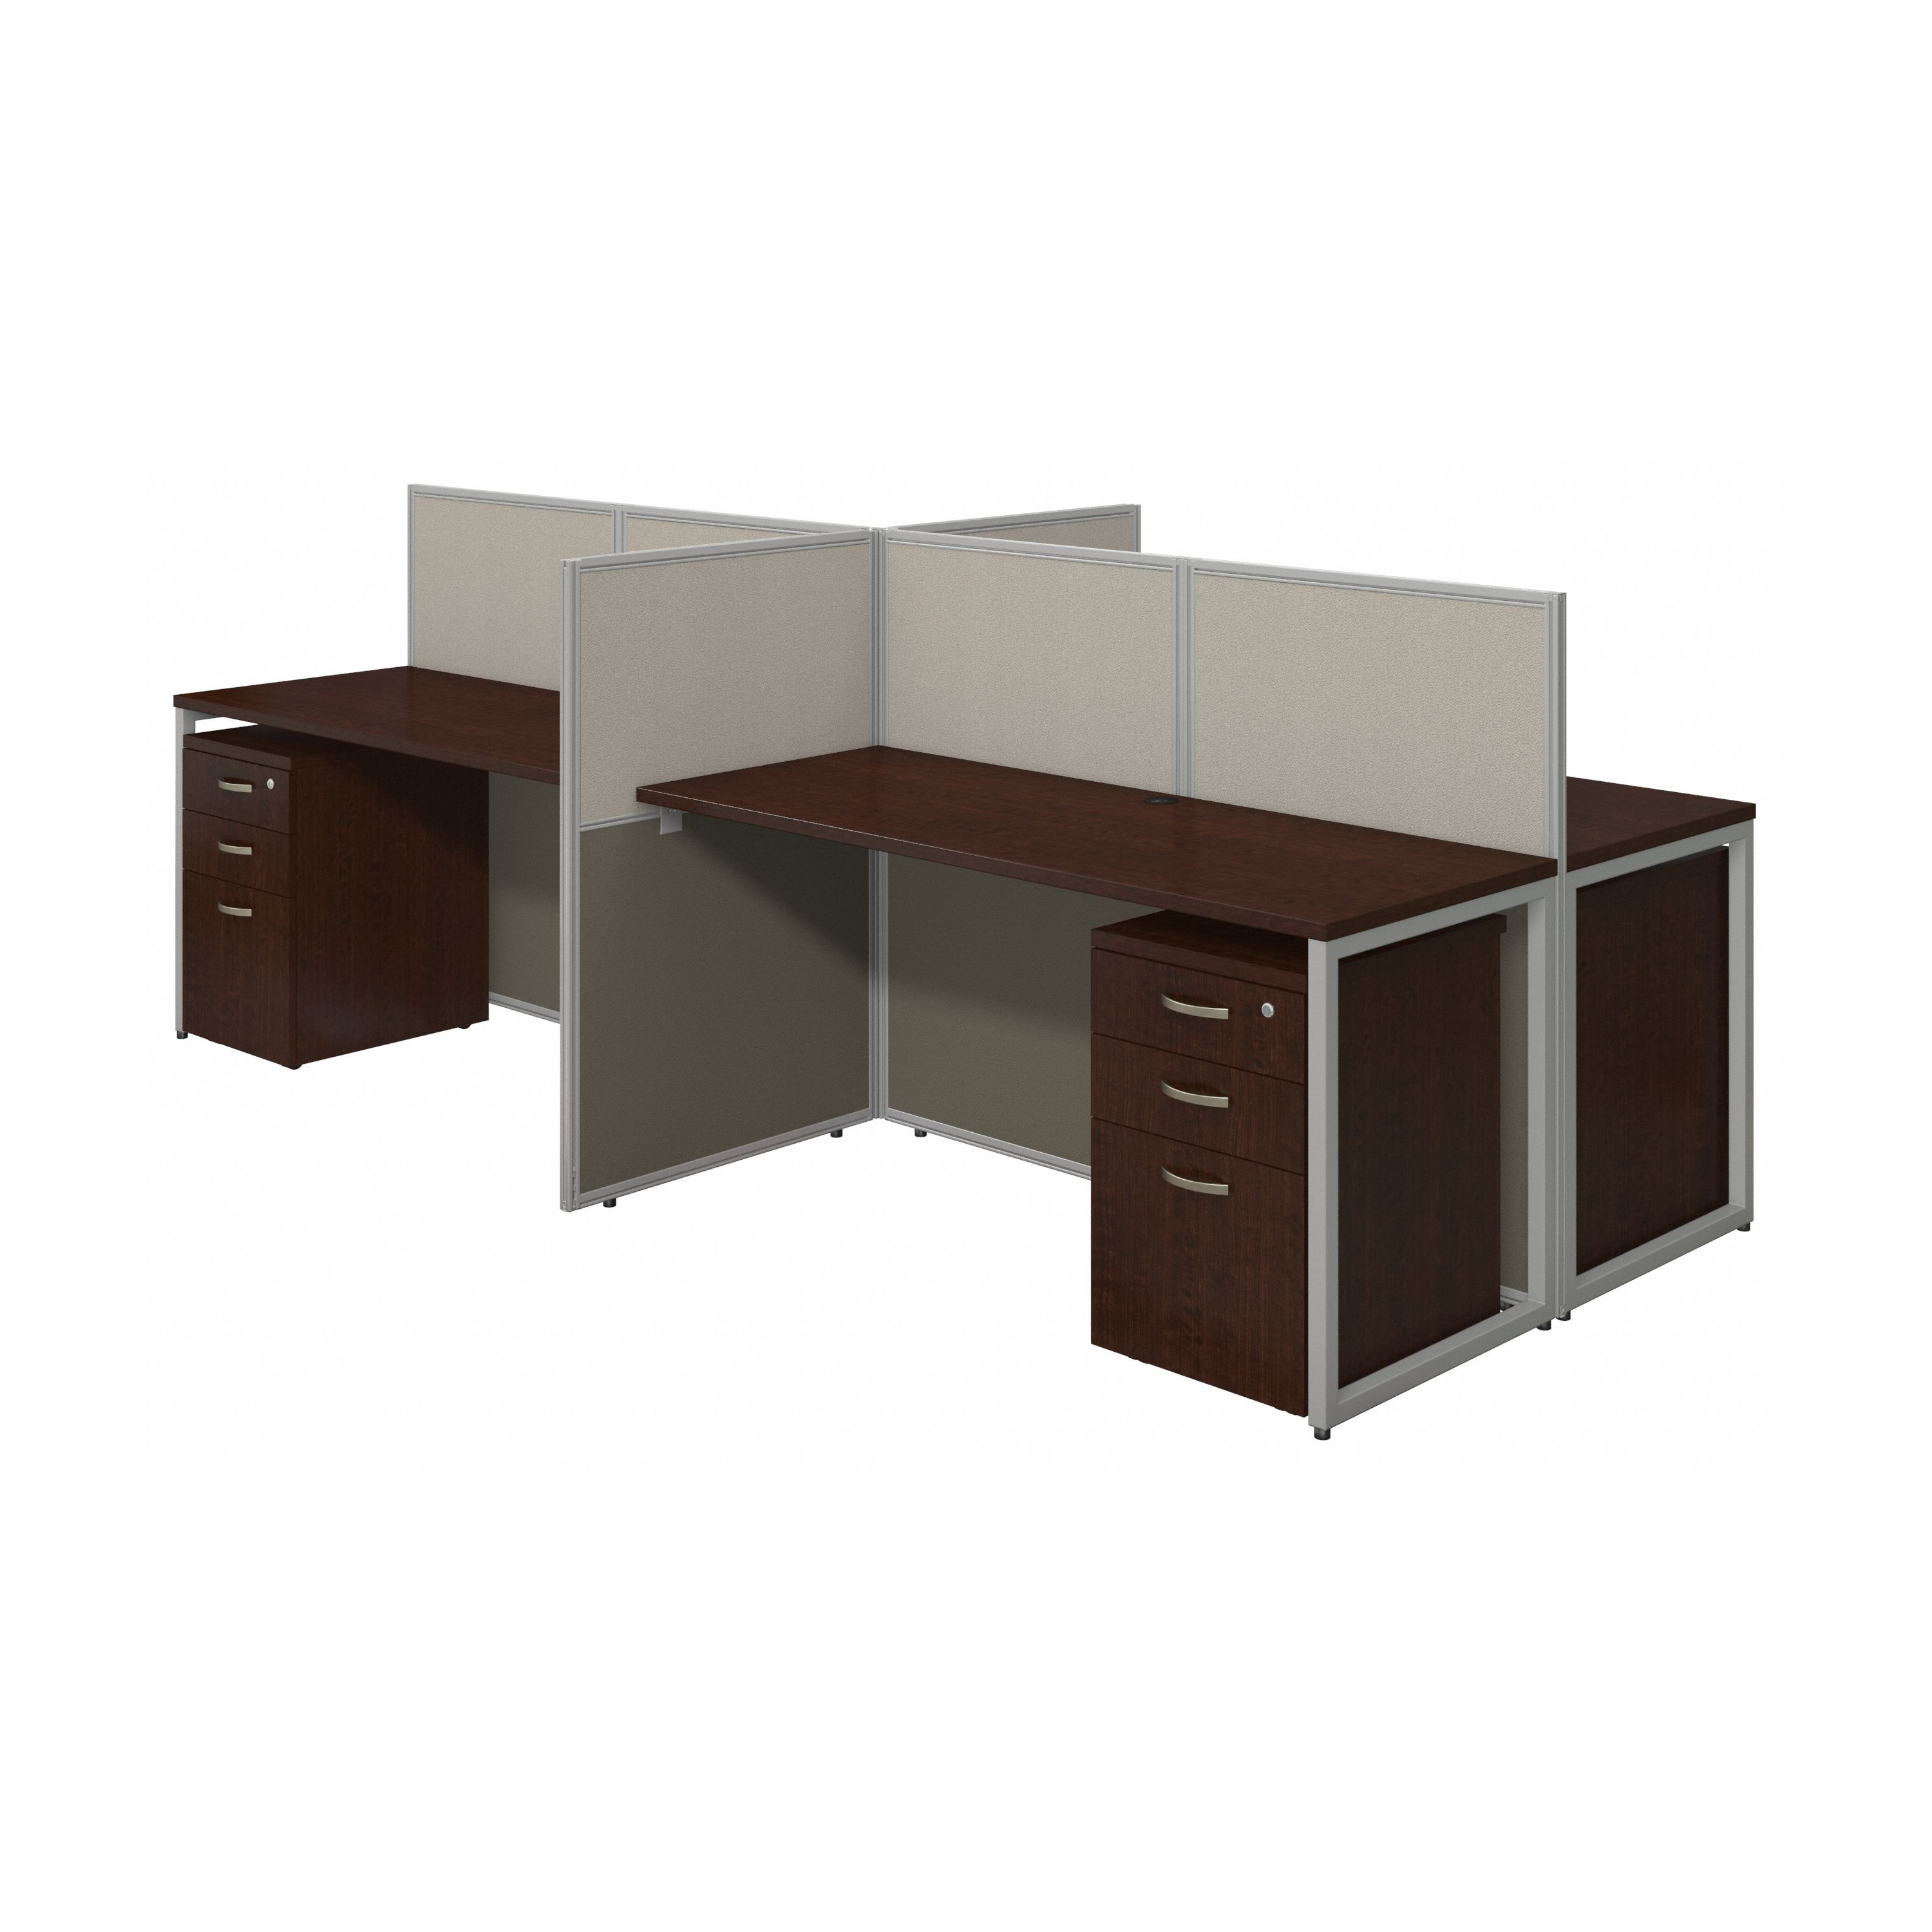 Shop Bush Business Furniture Easy Office 60W 4 Person Cubicle Desk with File Cabinets and 45H Panels 02 EOD660SMR-03K #color_mocha cherry